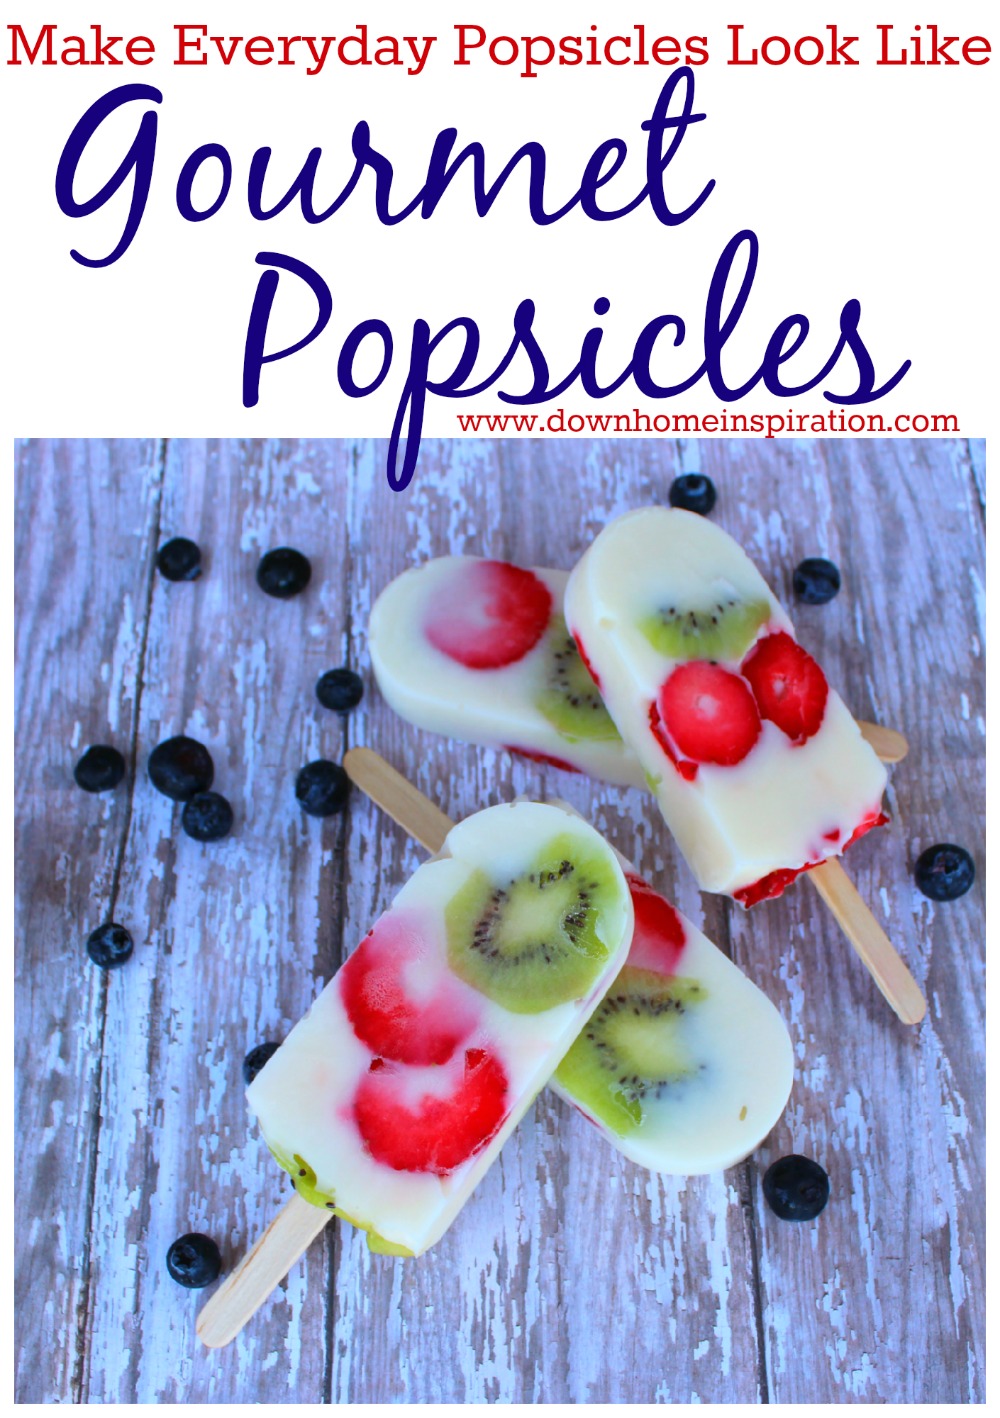 Make Everyday Popsicles Look Like Gourmet Popsicles - Down Home Inspiration